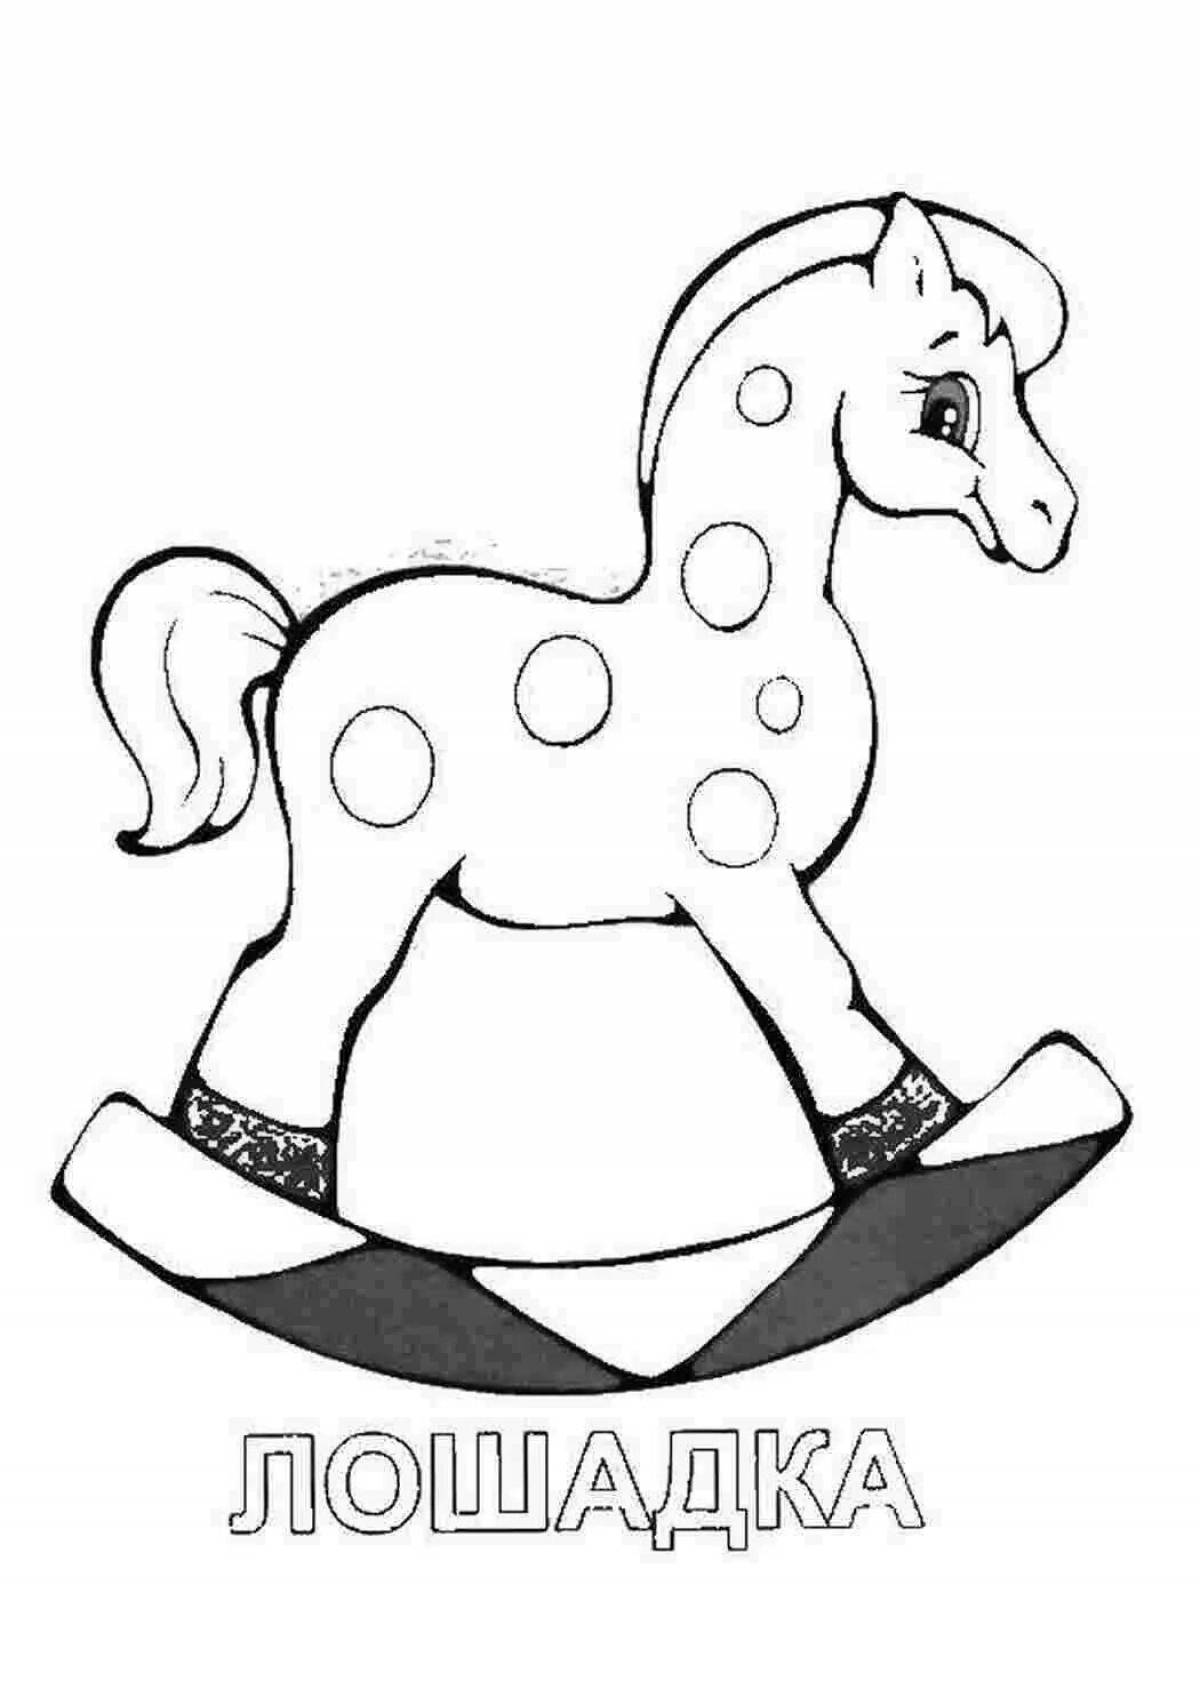 Shining horse coloring page